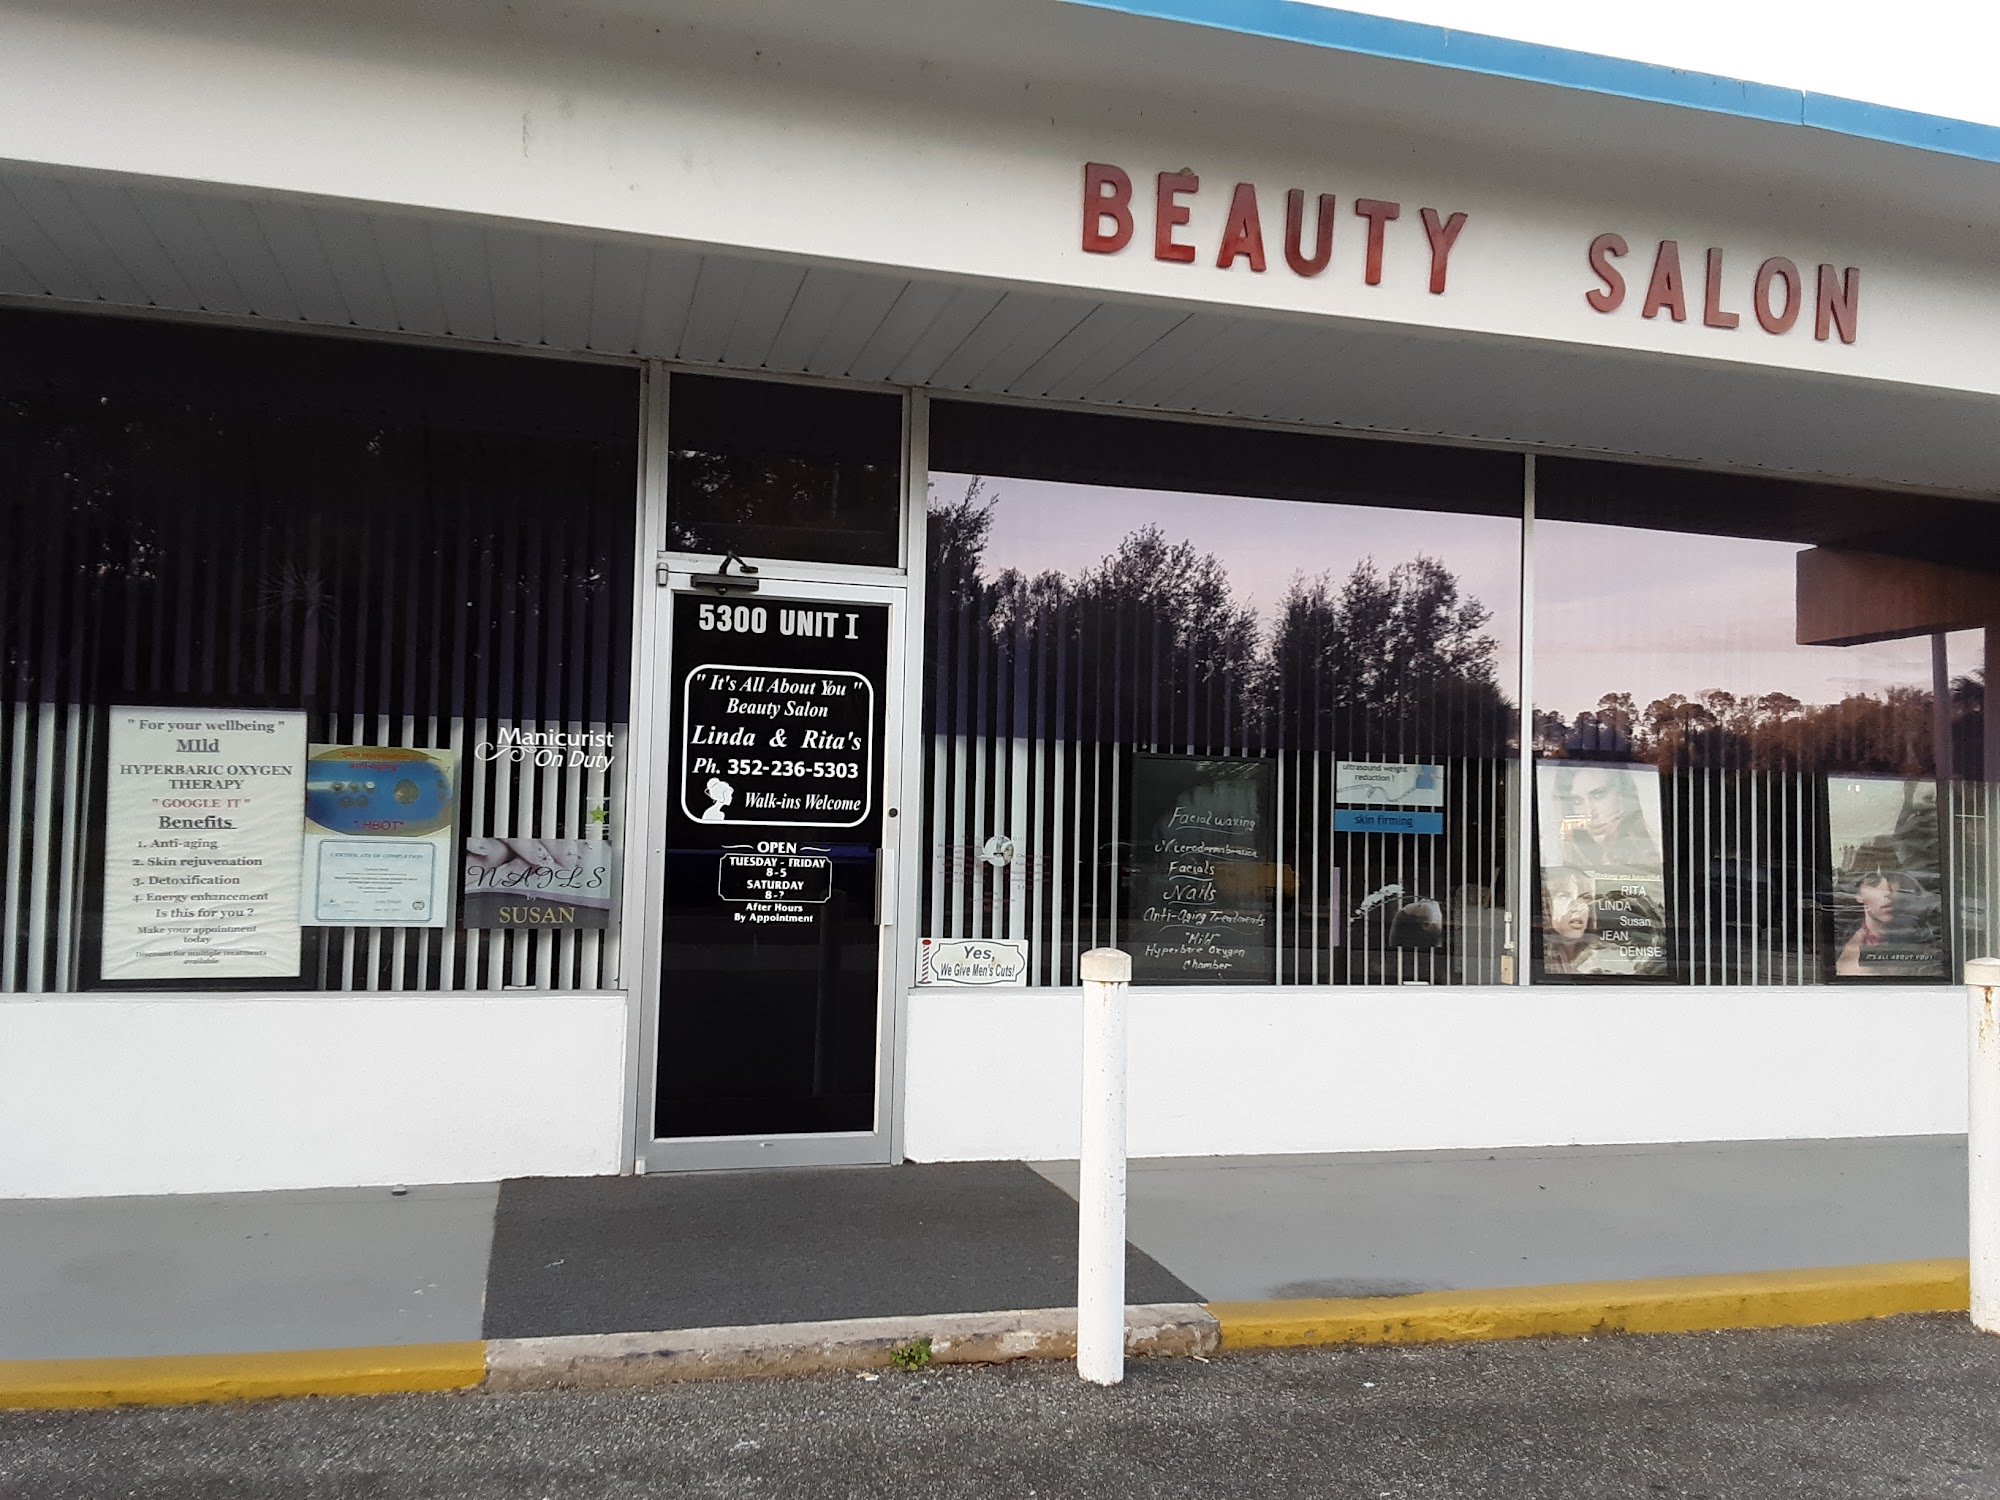 It's all About You Beauty Salon 5300 E Silver Springs Blvd, Silver Springs Florida 34488